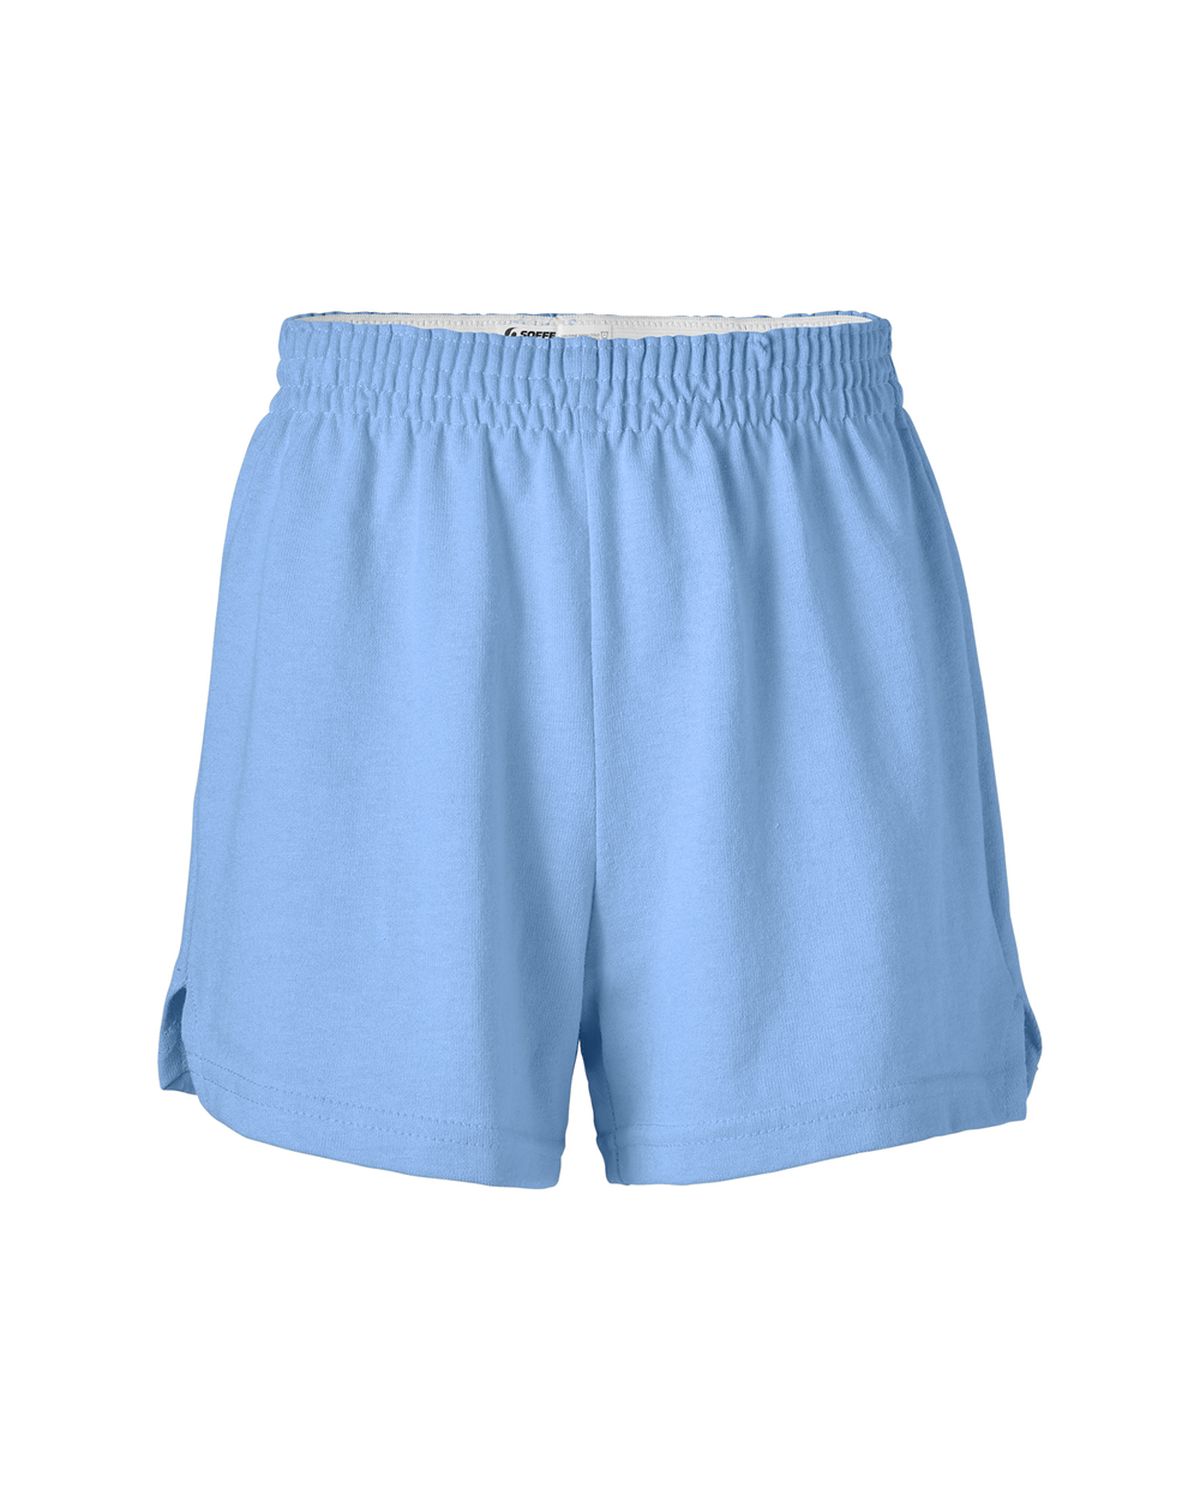 Soffe Girls Authentic Short